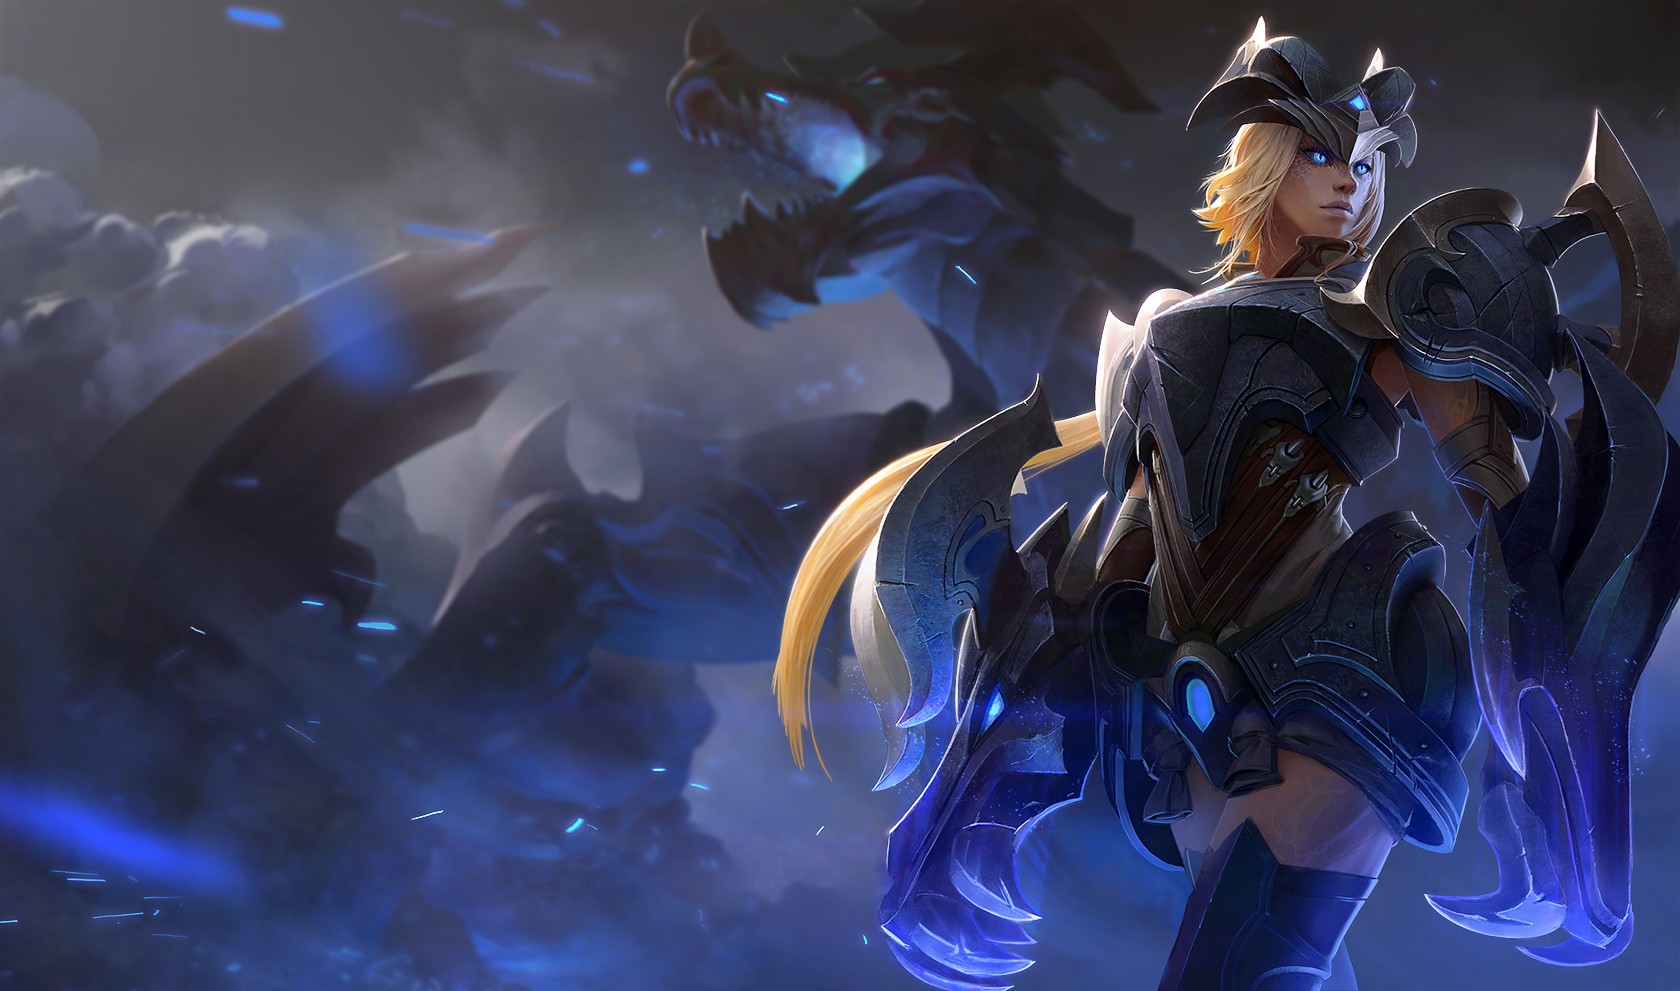 General 1680x991 dragon blonde knight League of Legends Shyvana video games fantasy girl PC gaming glowing eyes blue eyes video game girls video game art fantasy armor fantasy art Shyvana (League of Legends) video game characters